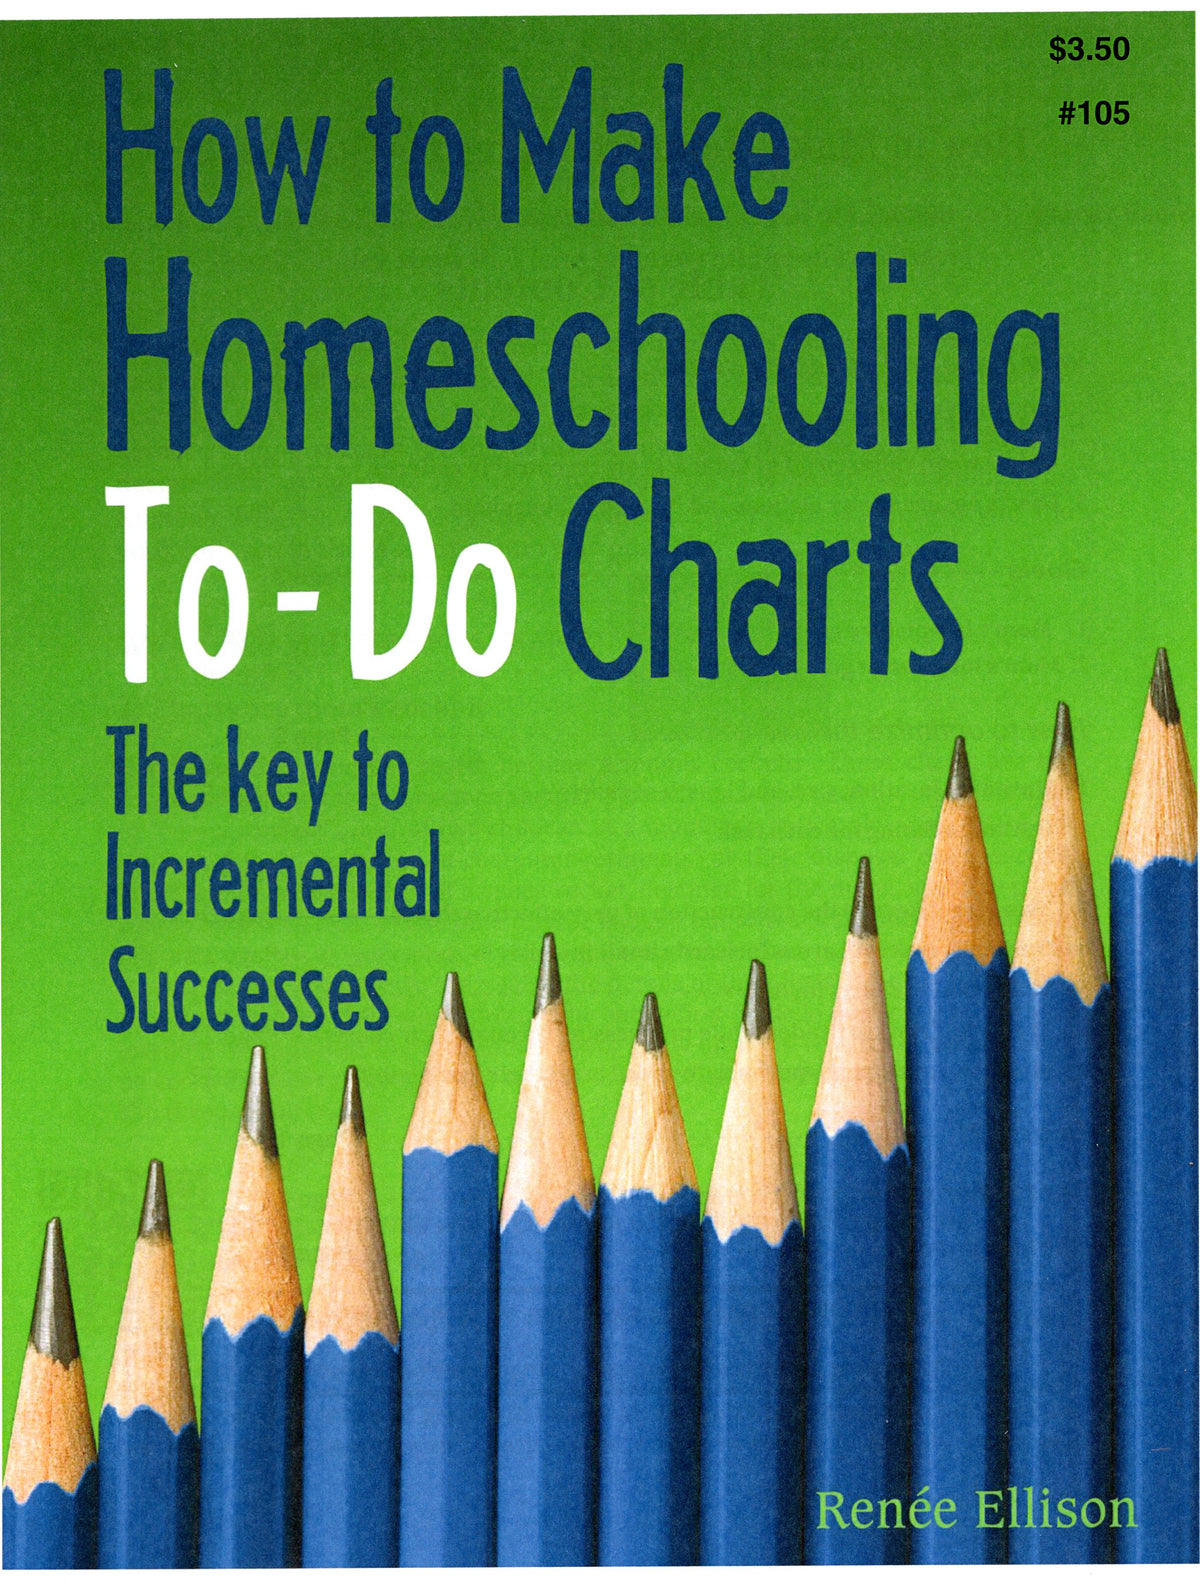 A strategy for getting homeschooling on track